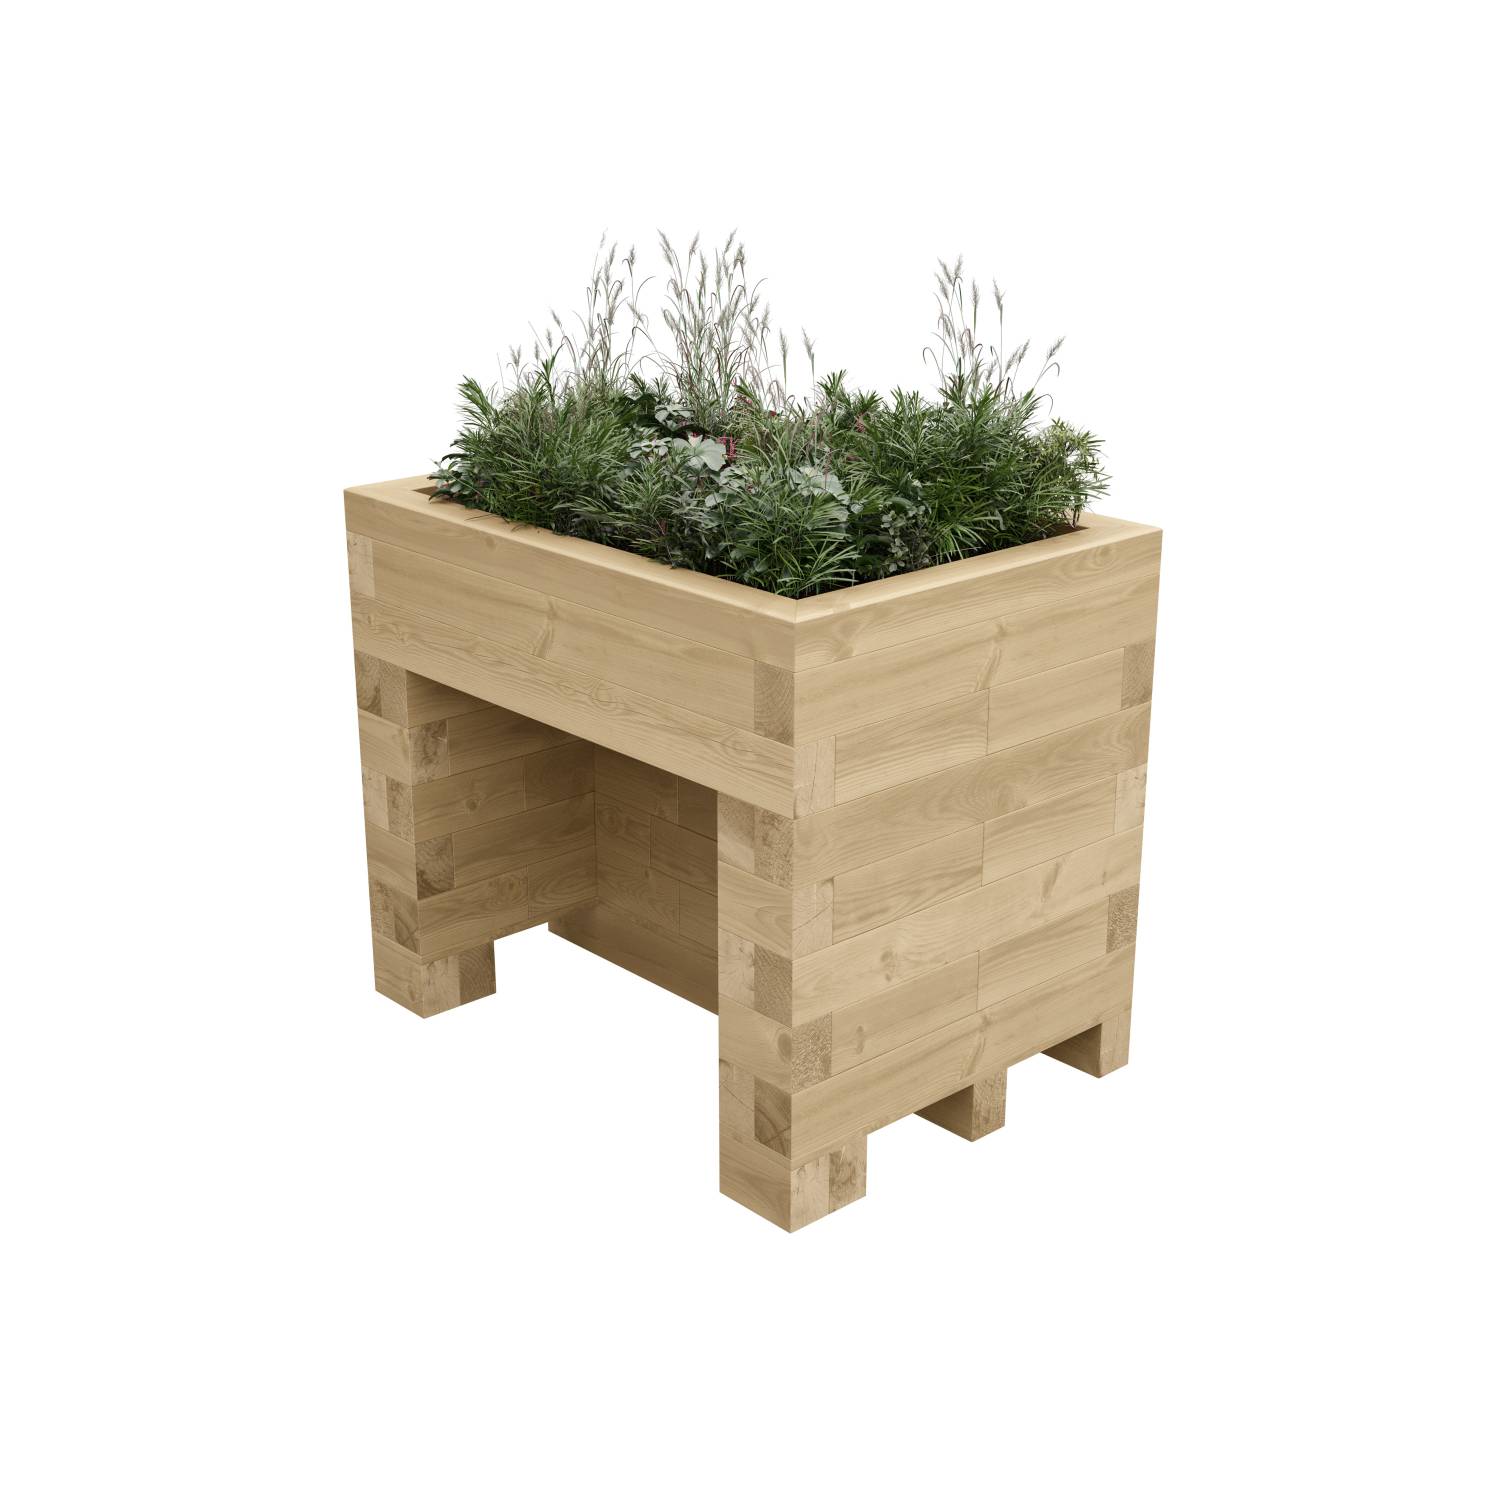 WoodBlocX Moveable Planters - Timber Planter